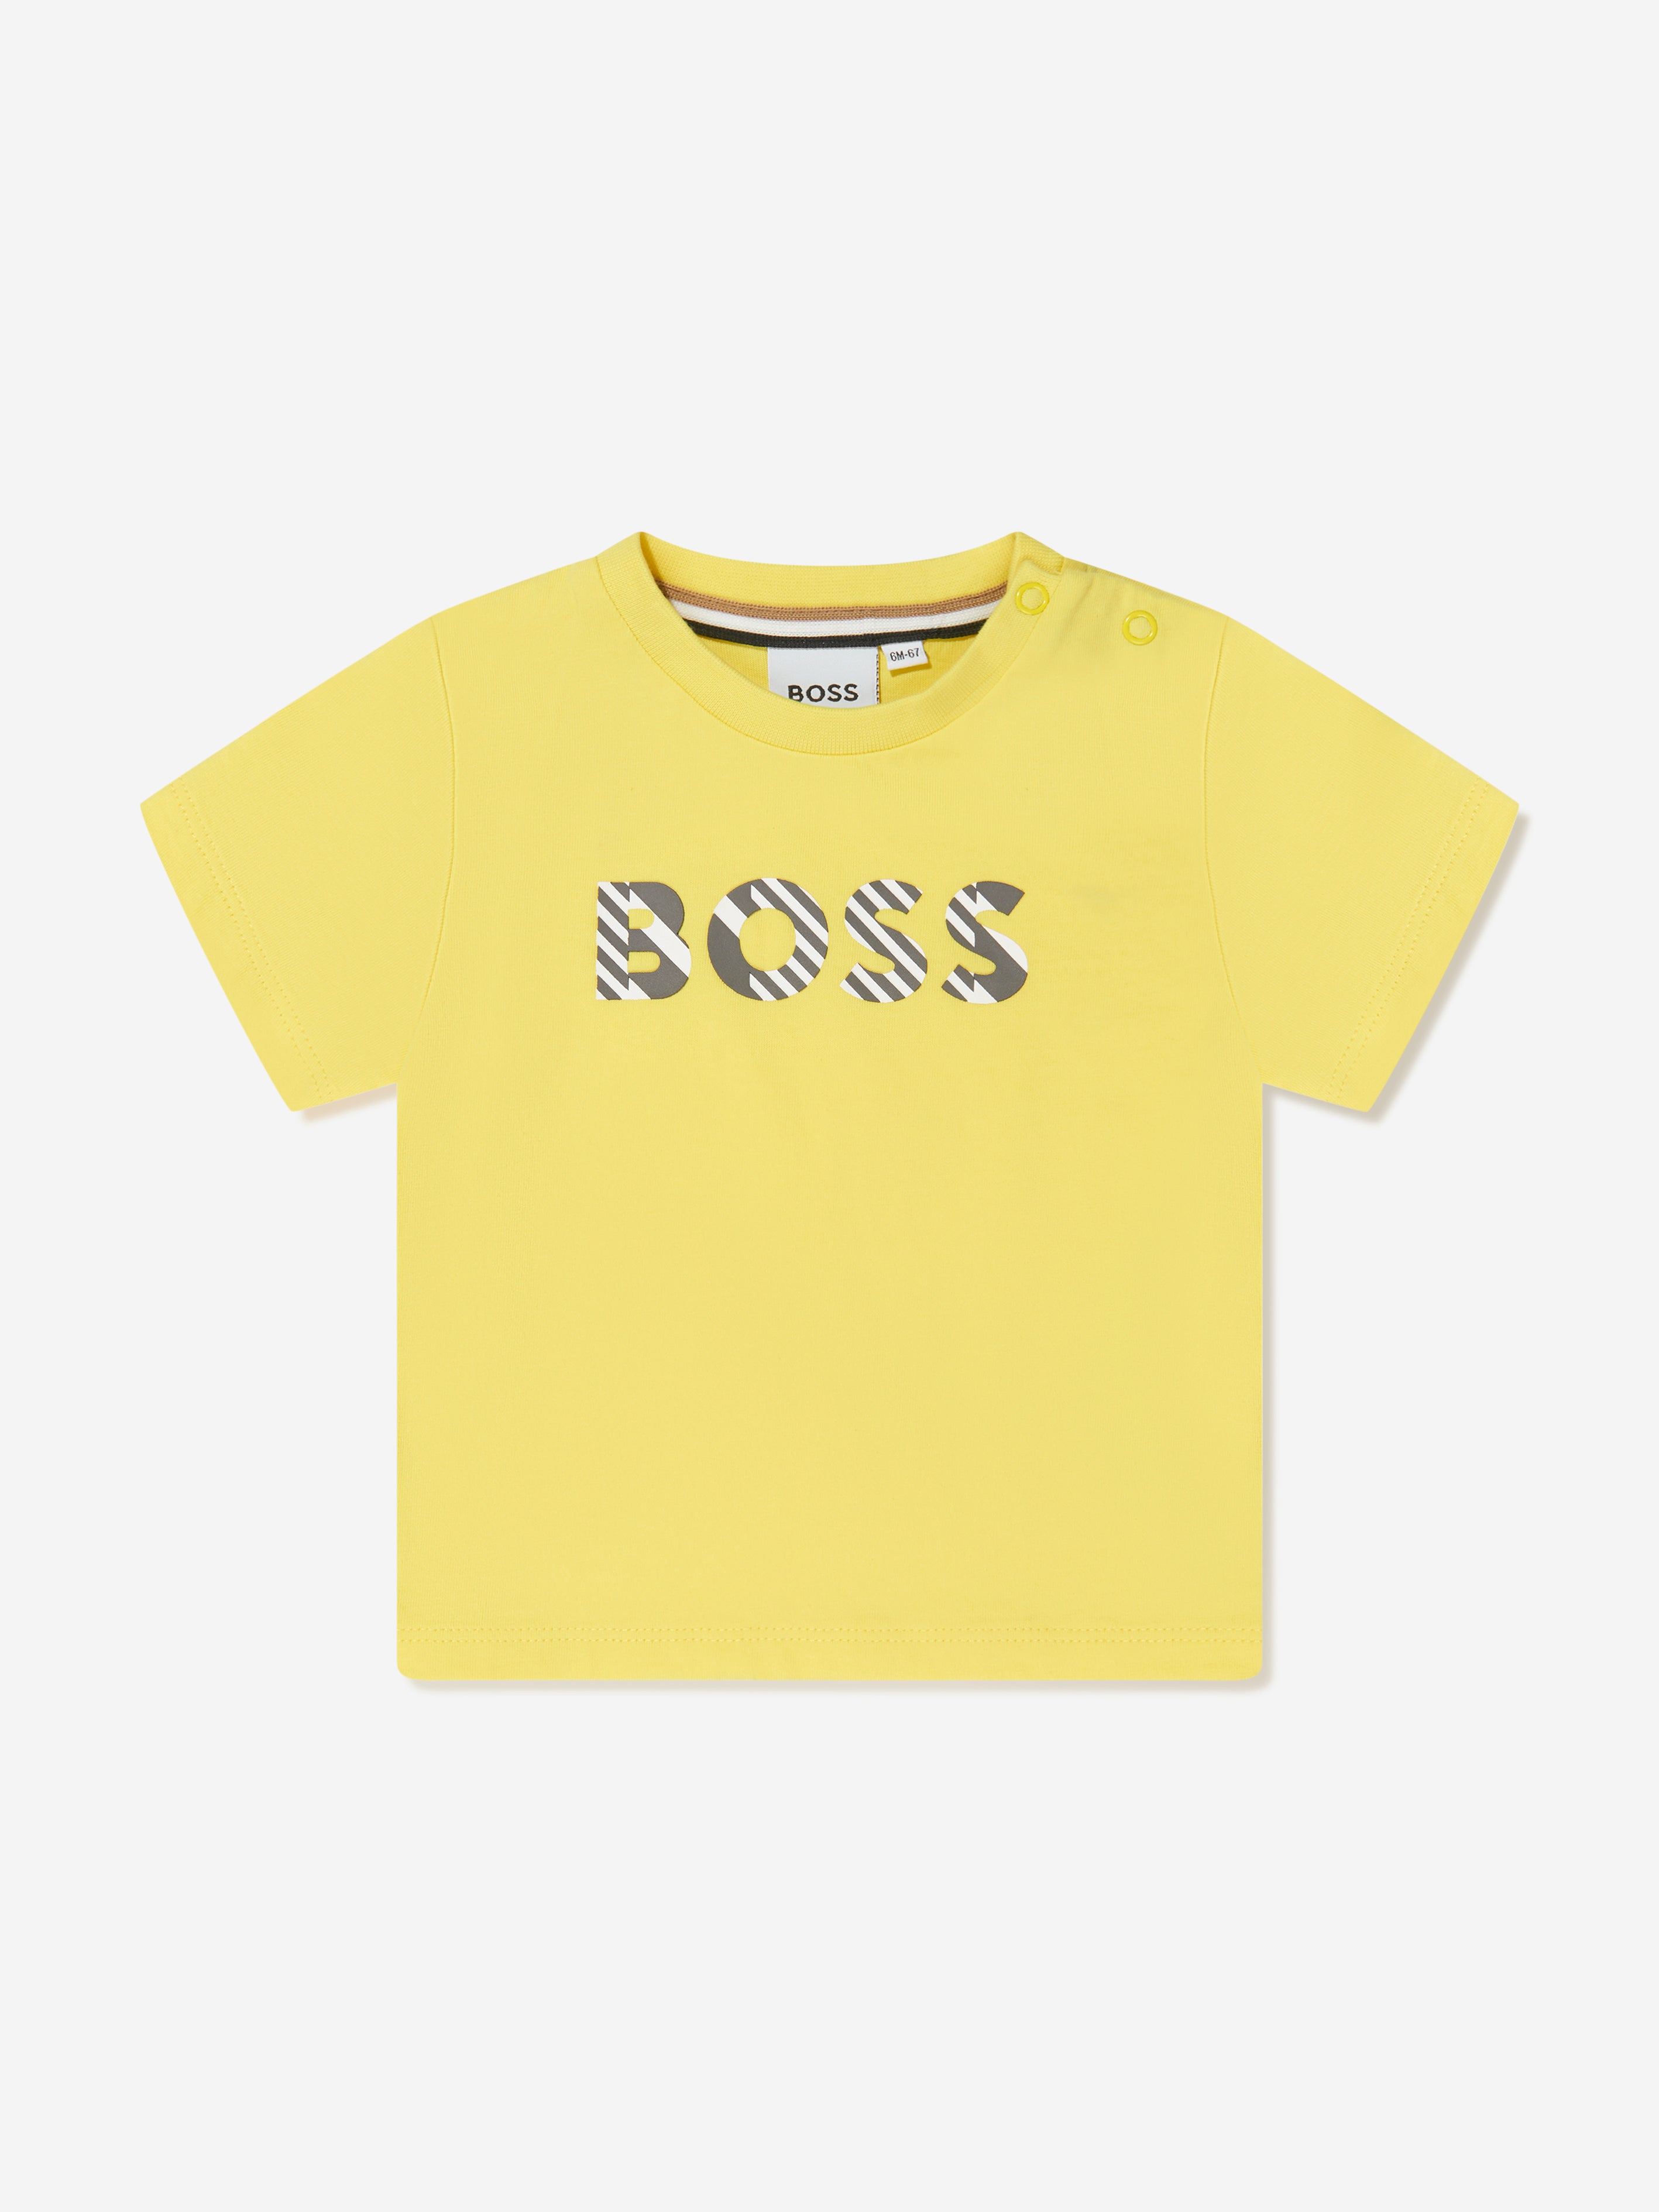 Hugo Boss Babies' T-shirt With Print In Yellow